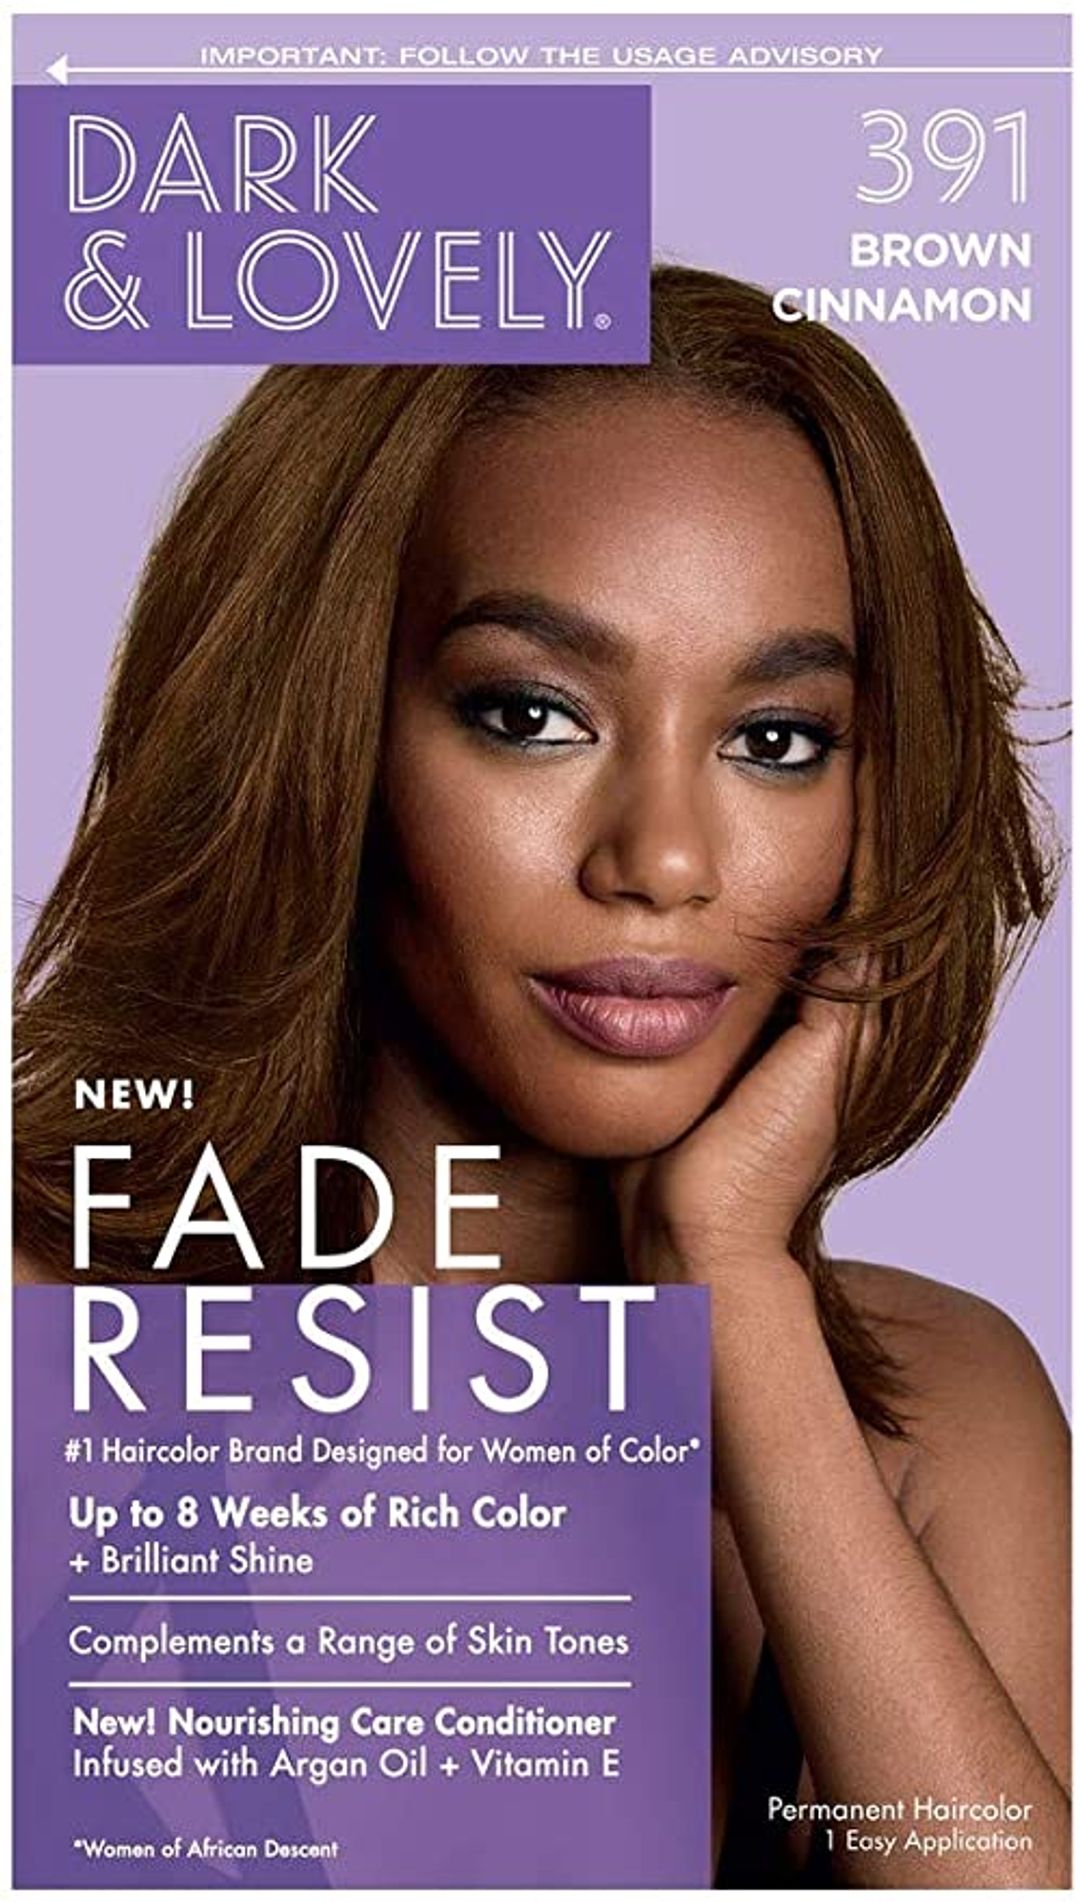 Dark and Lovely Fade Resistant Rich Conditioning Hair Color - Brown Cinnamon,391